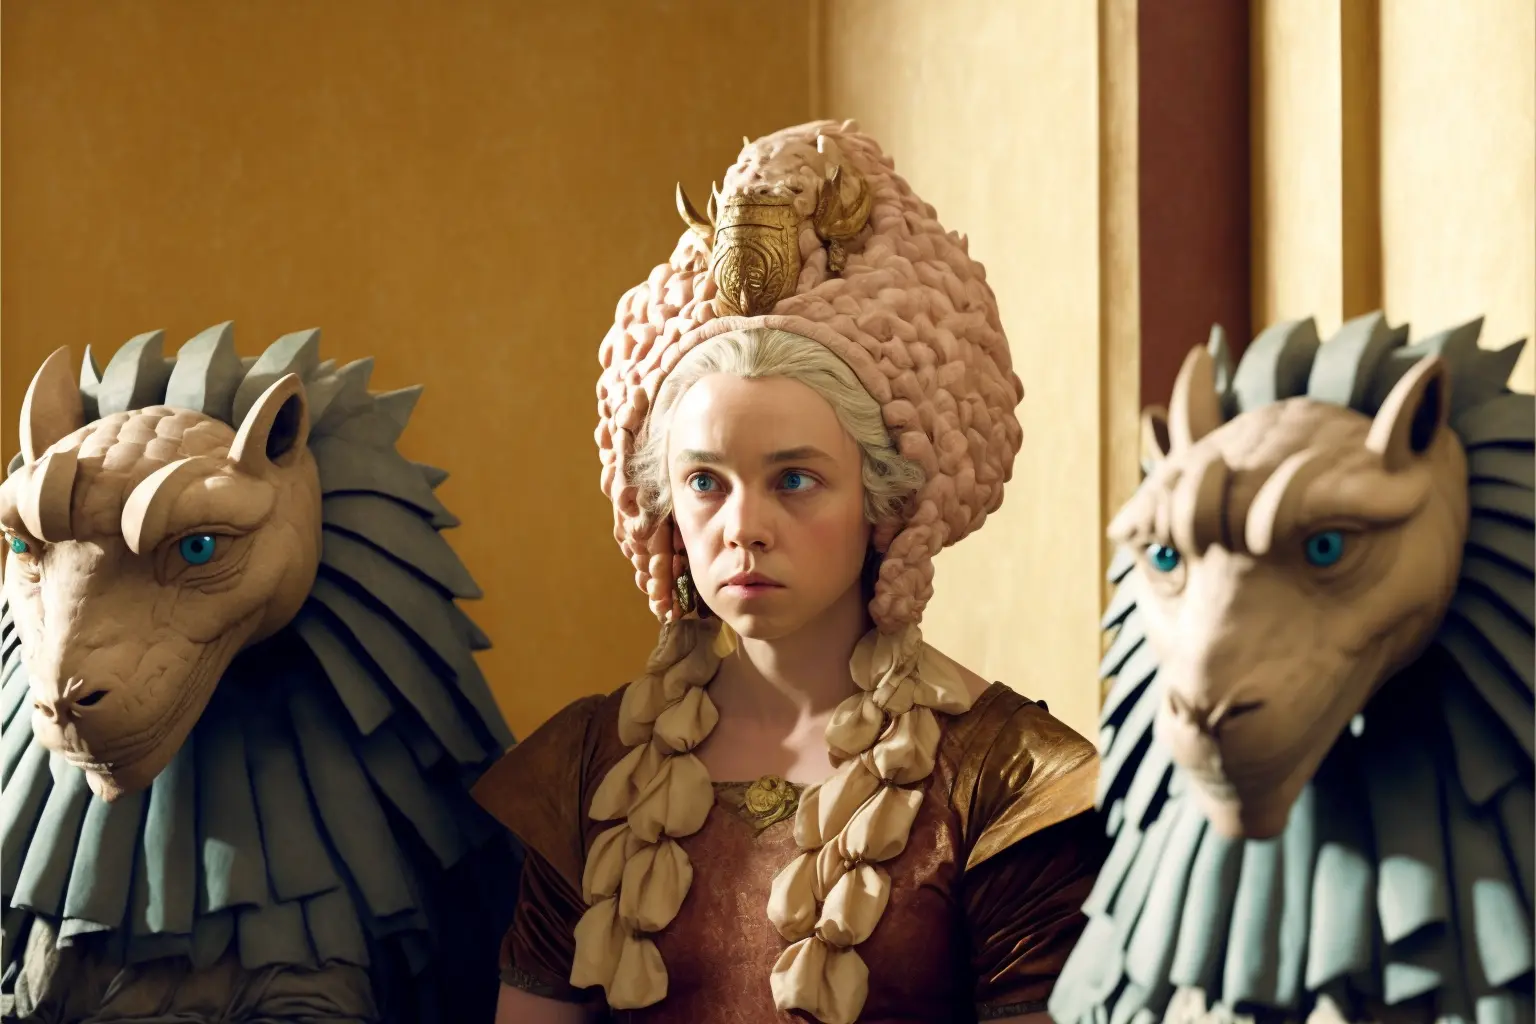 still from film, Daenerys Targaryen and her dragons, directed by Wes Anderson, quirky costume design